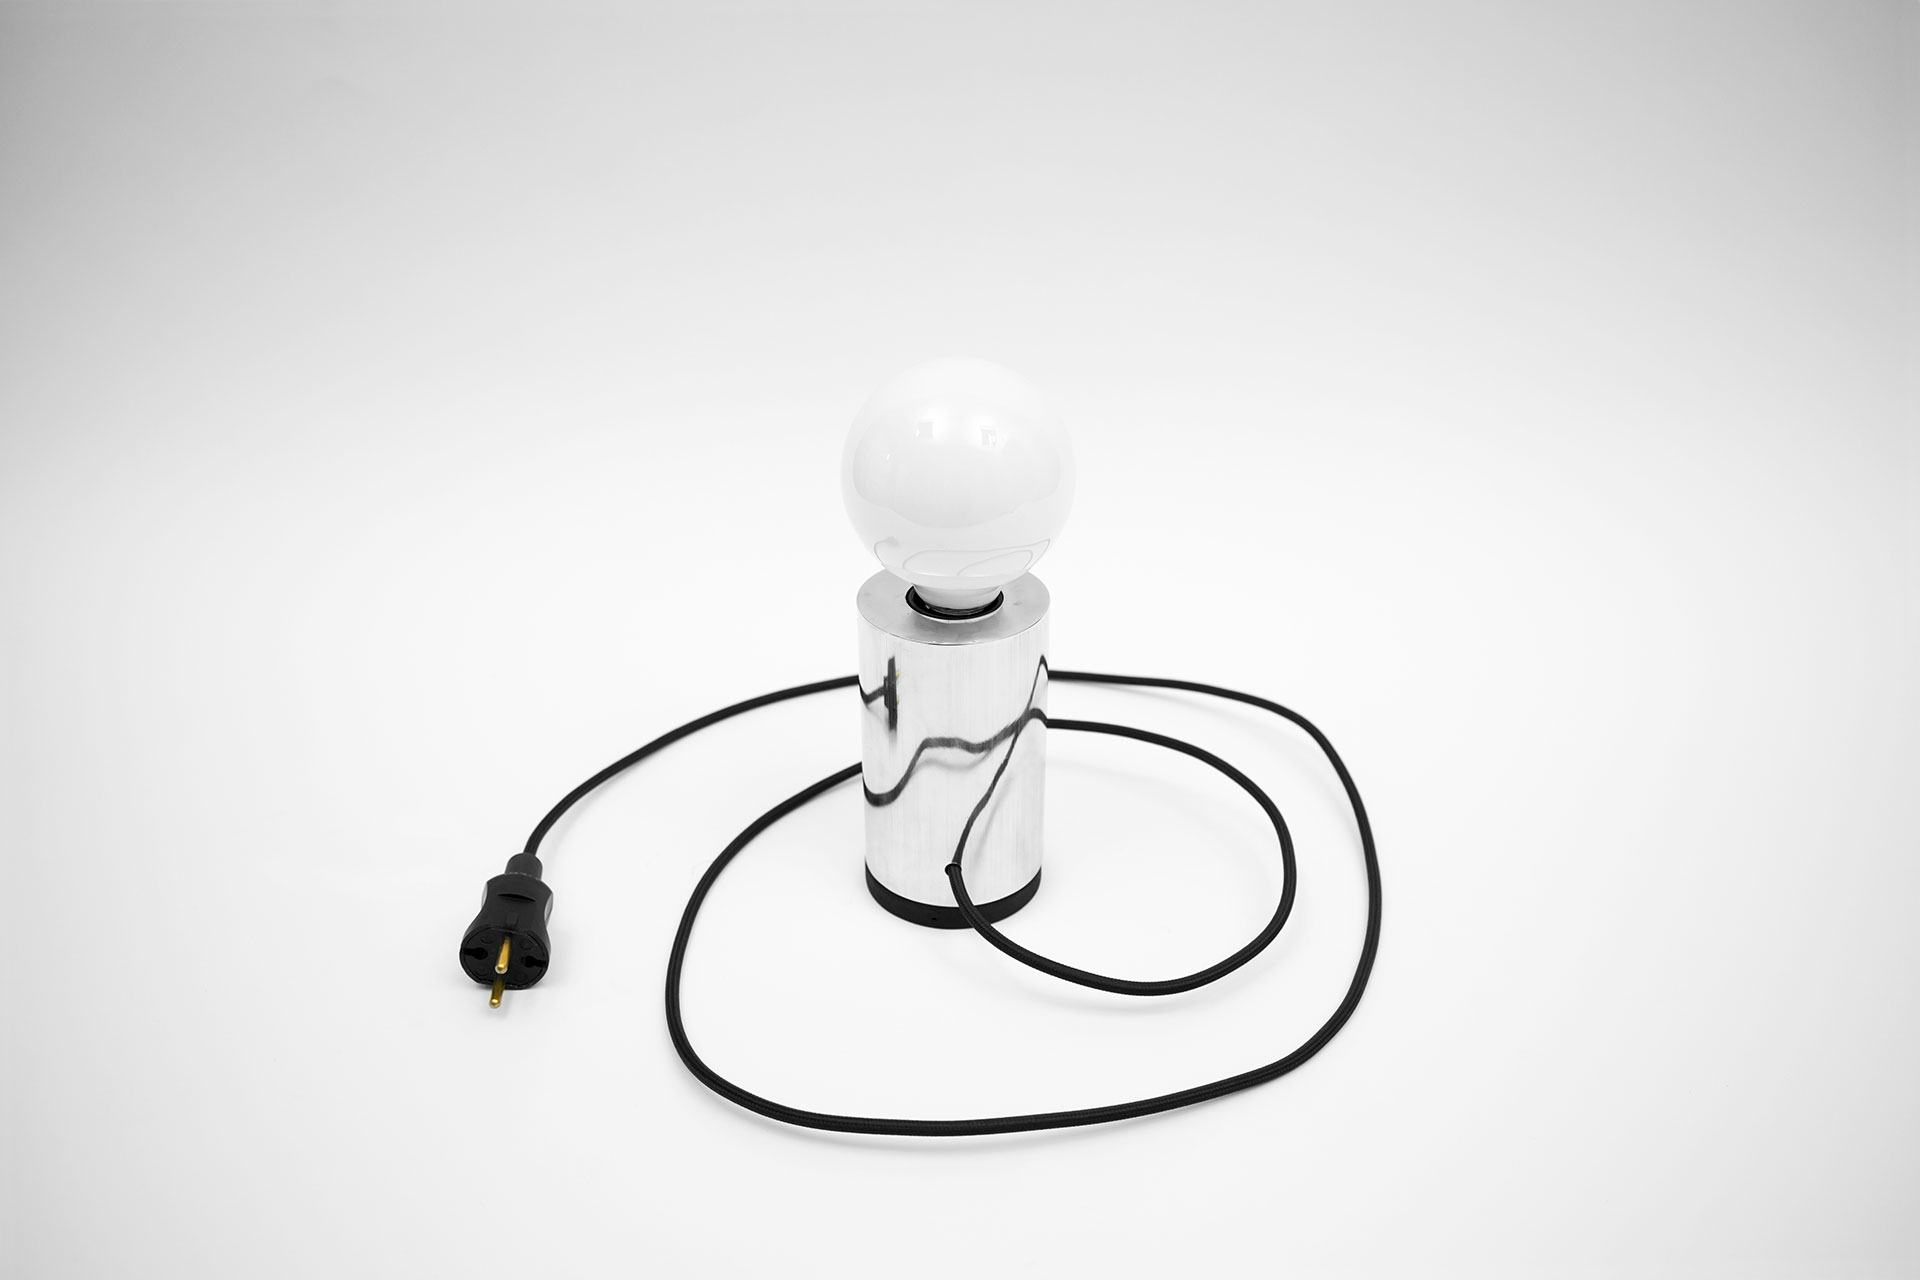 Cool aluminum table lamp with magic touch dimmer inspired by scandinavian minimalist style